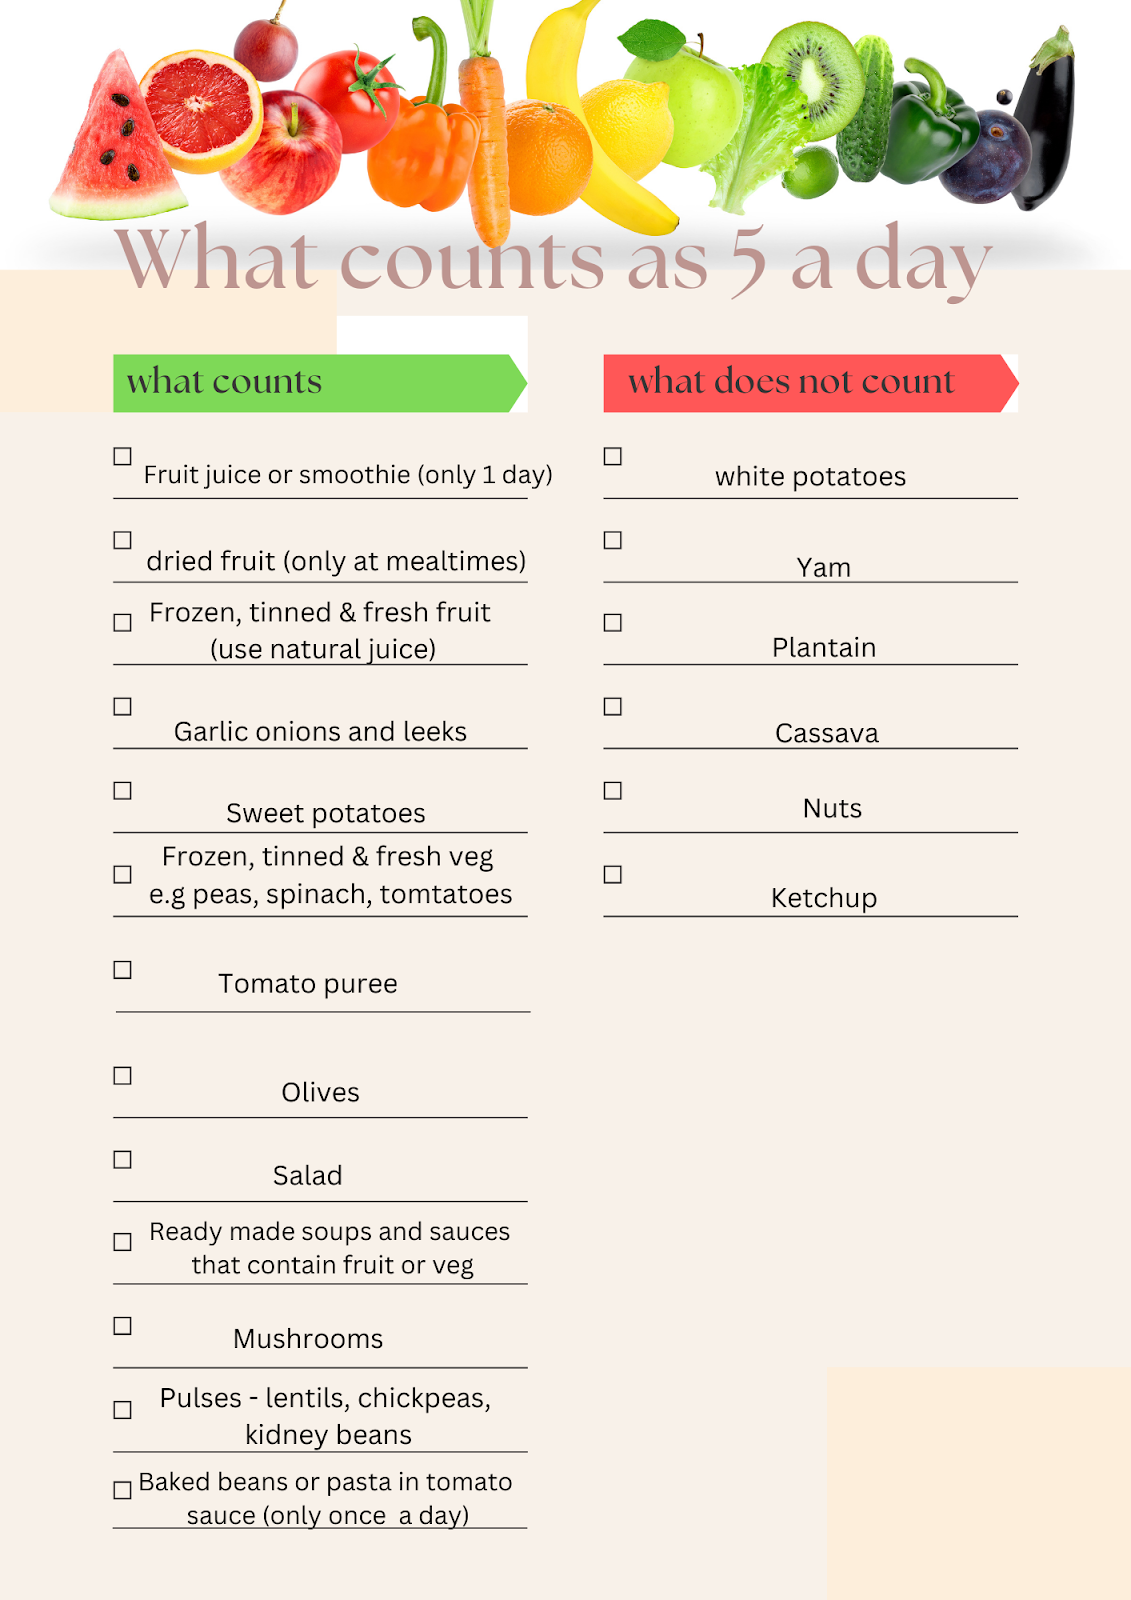 For kids eating 5 a day - what counts and what does not count